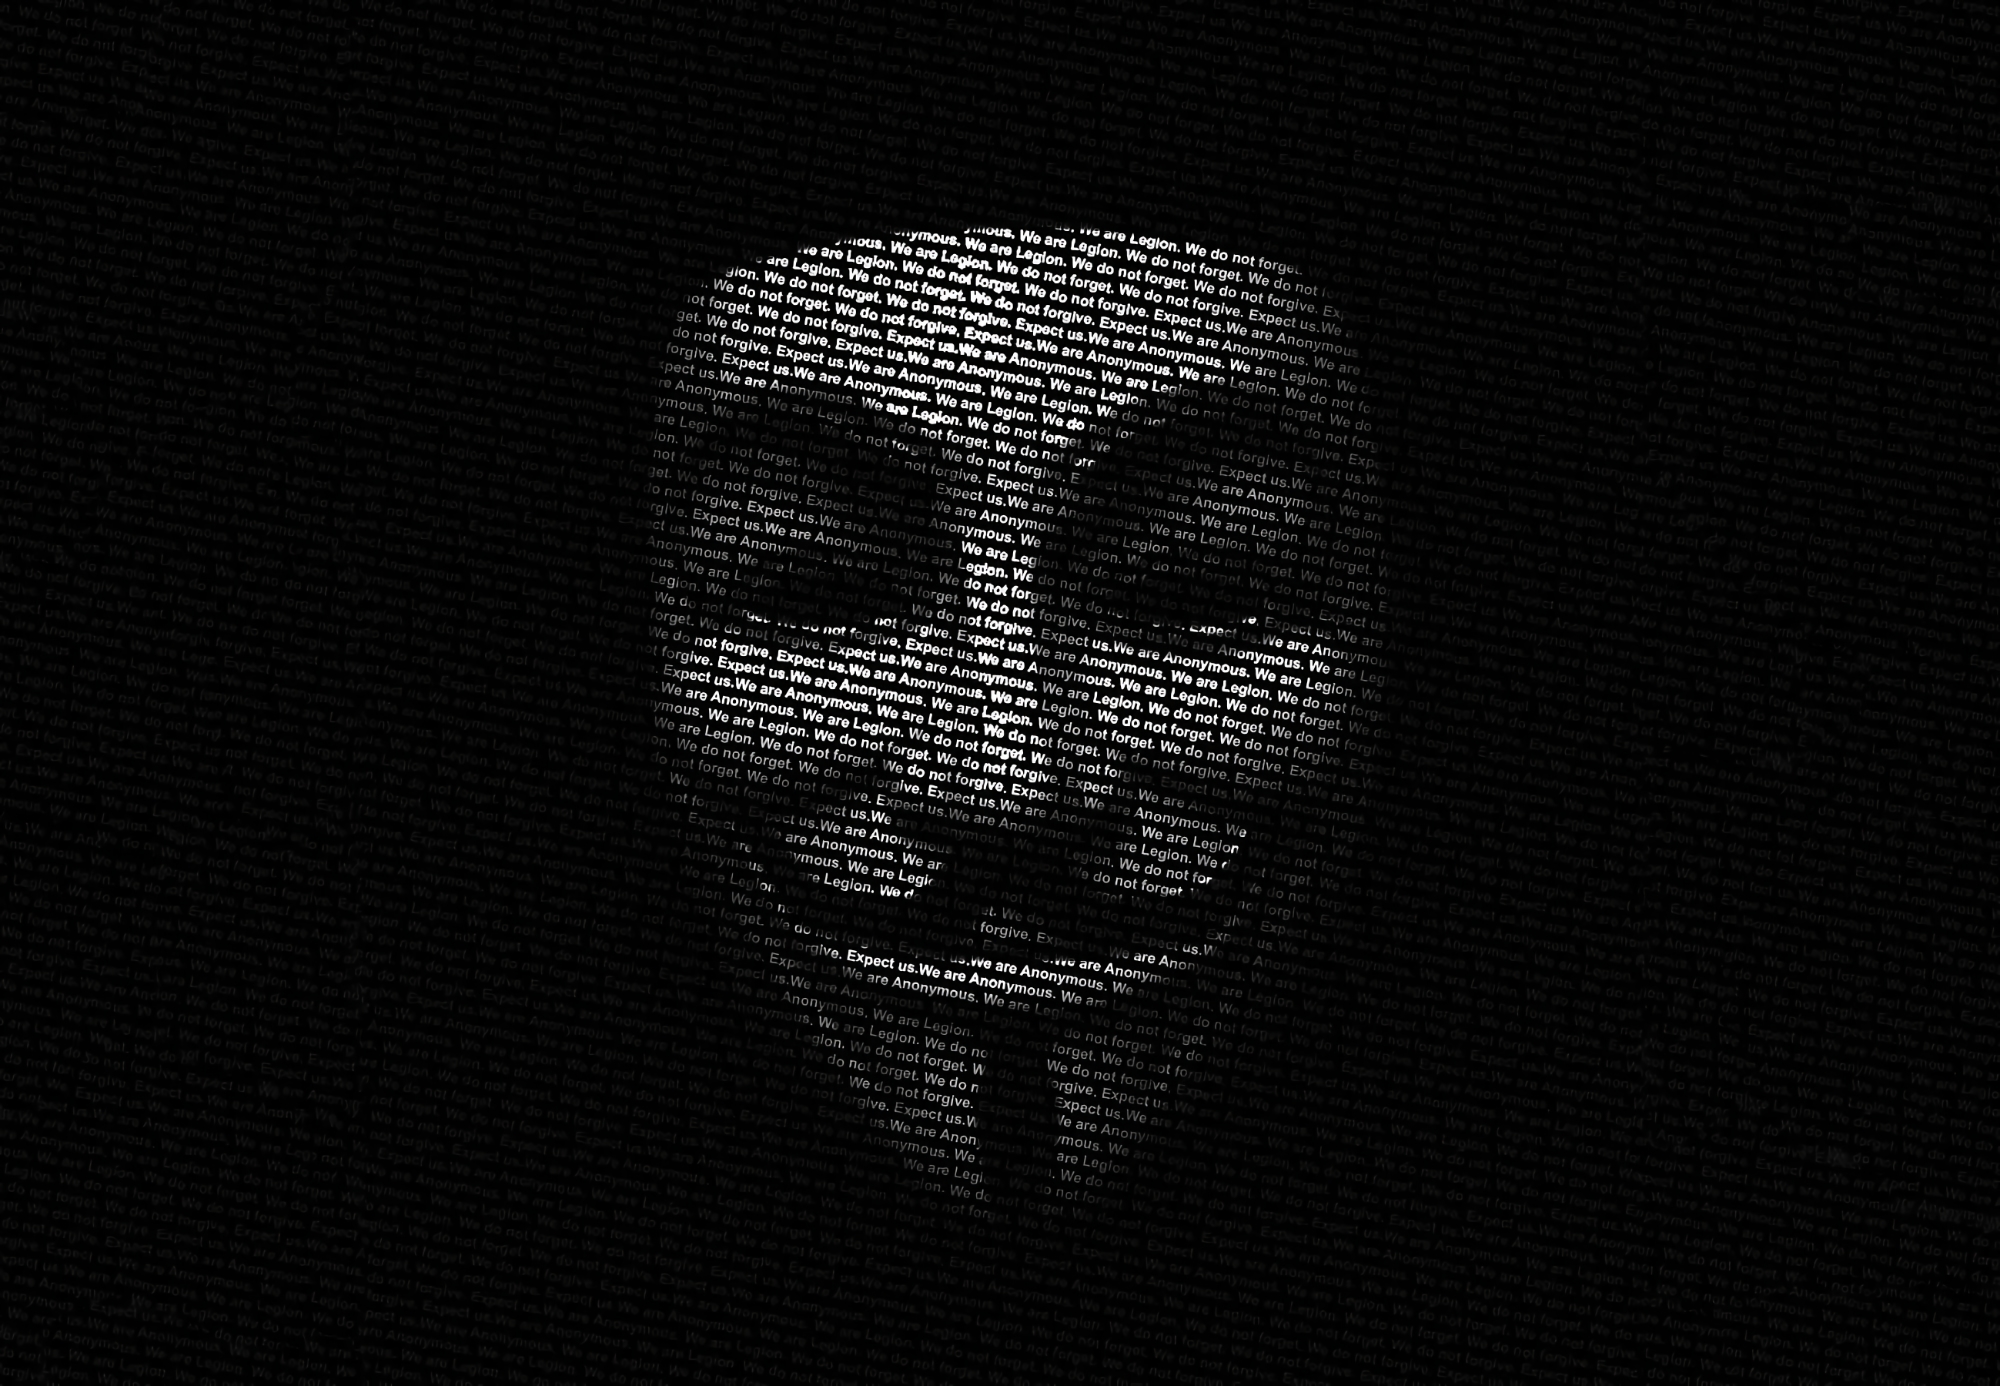 Anonymous hacked the largest bank in Russia